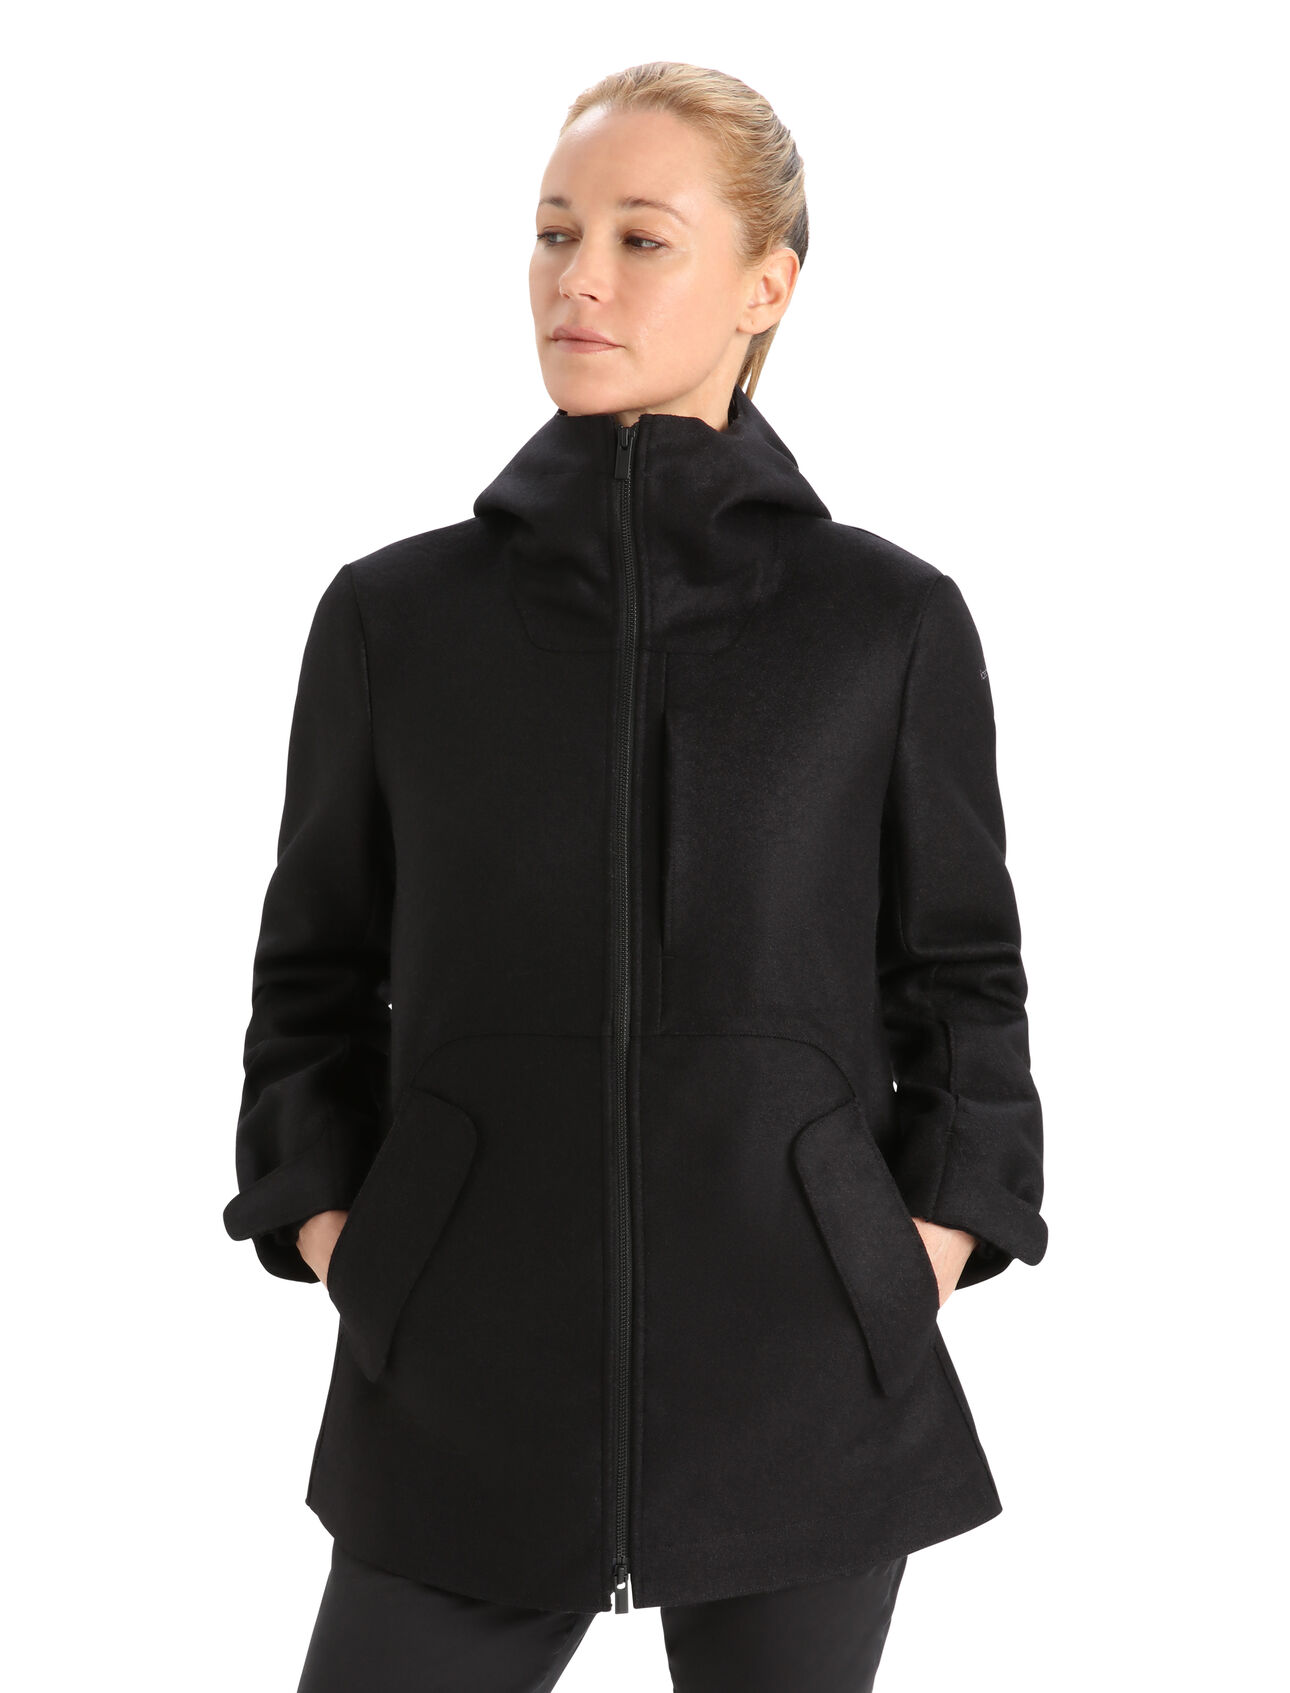 Womens Felted Merino Hooded Jacket A classic felted merino jacket ideal for everyday warmth and cold-weather commutes, the Felted Merino Hooded Jacket features 100% felted merino wool that regulates body temperature and naturally resists odors no matter the weather.